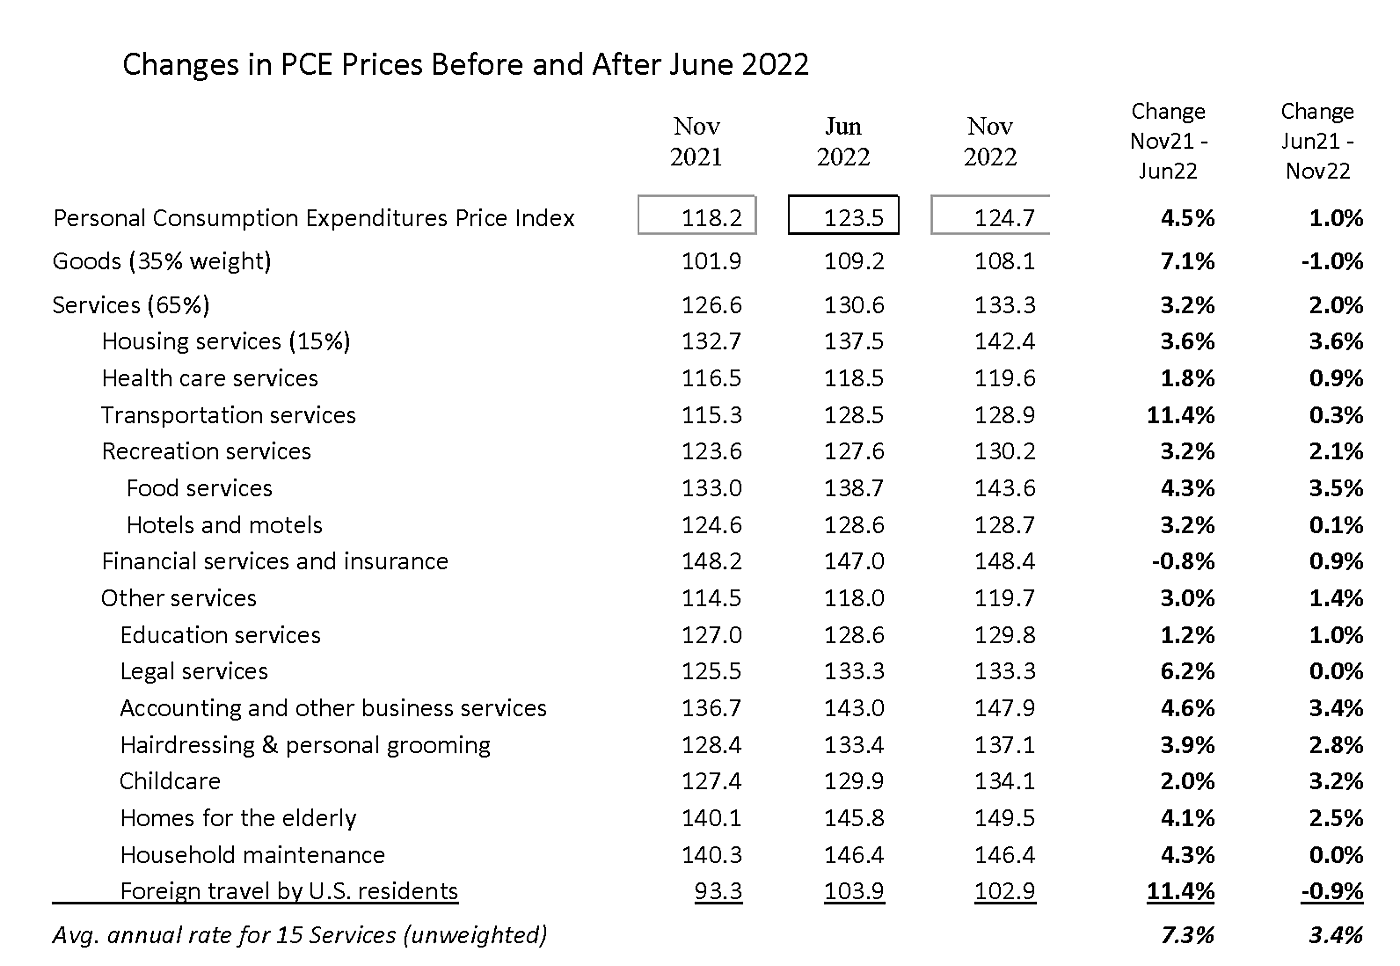 Core Services Less Housing in the PCE